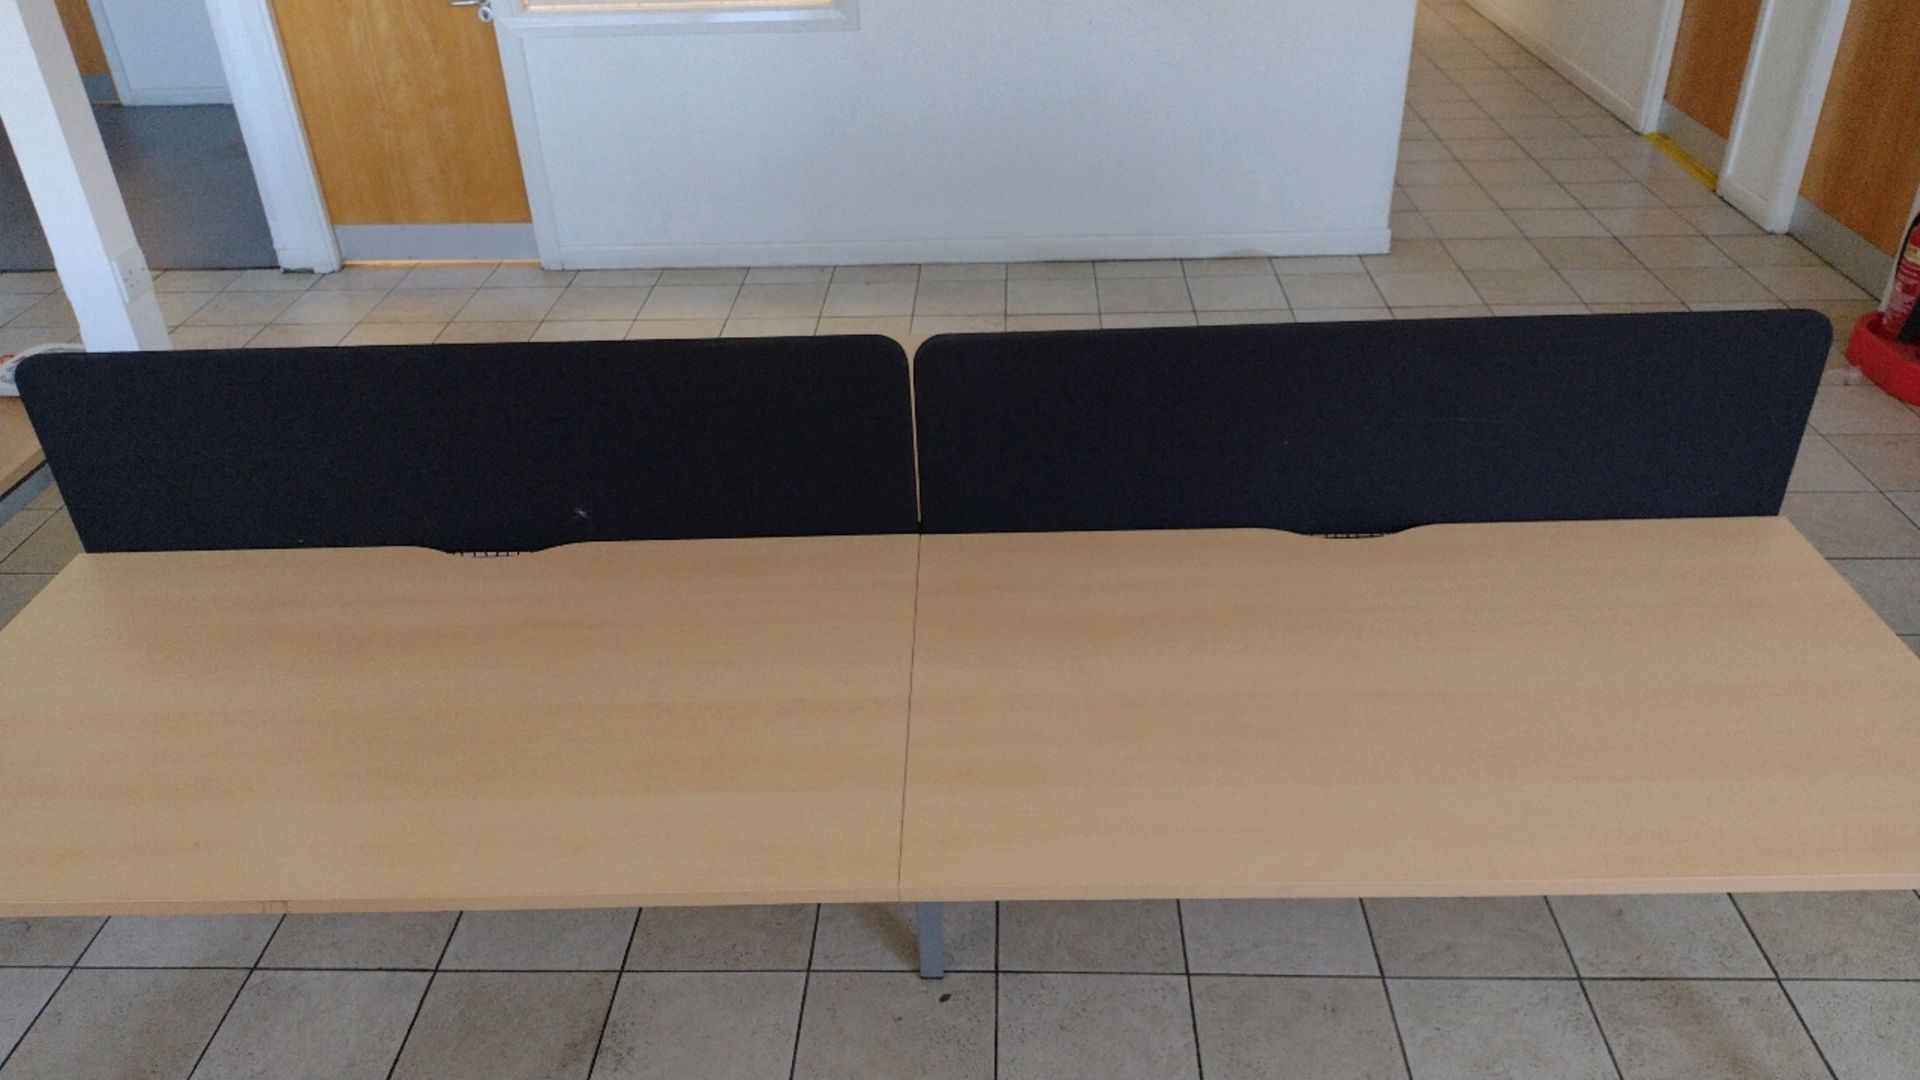 4x Office Desk With Central Divide - Image 6 of 6